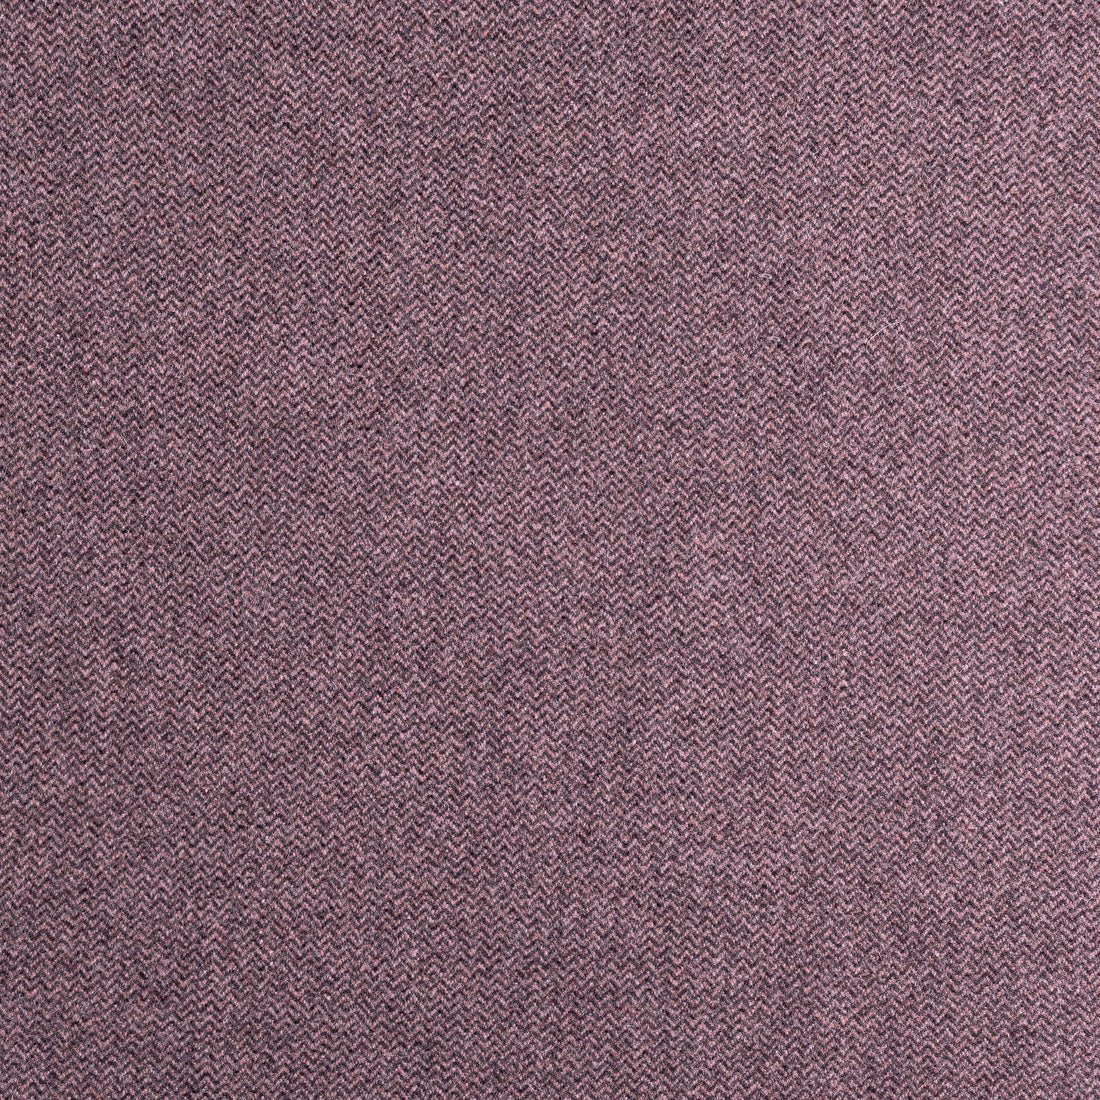 Dorset fabric in aubergine color - pattern number W80902 - by Thibaut in the Dunmore collection